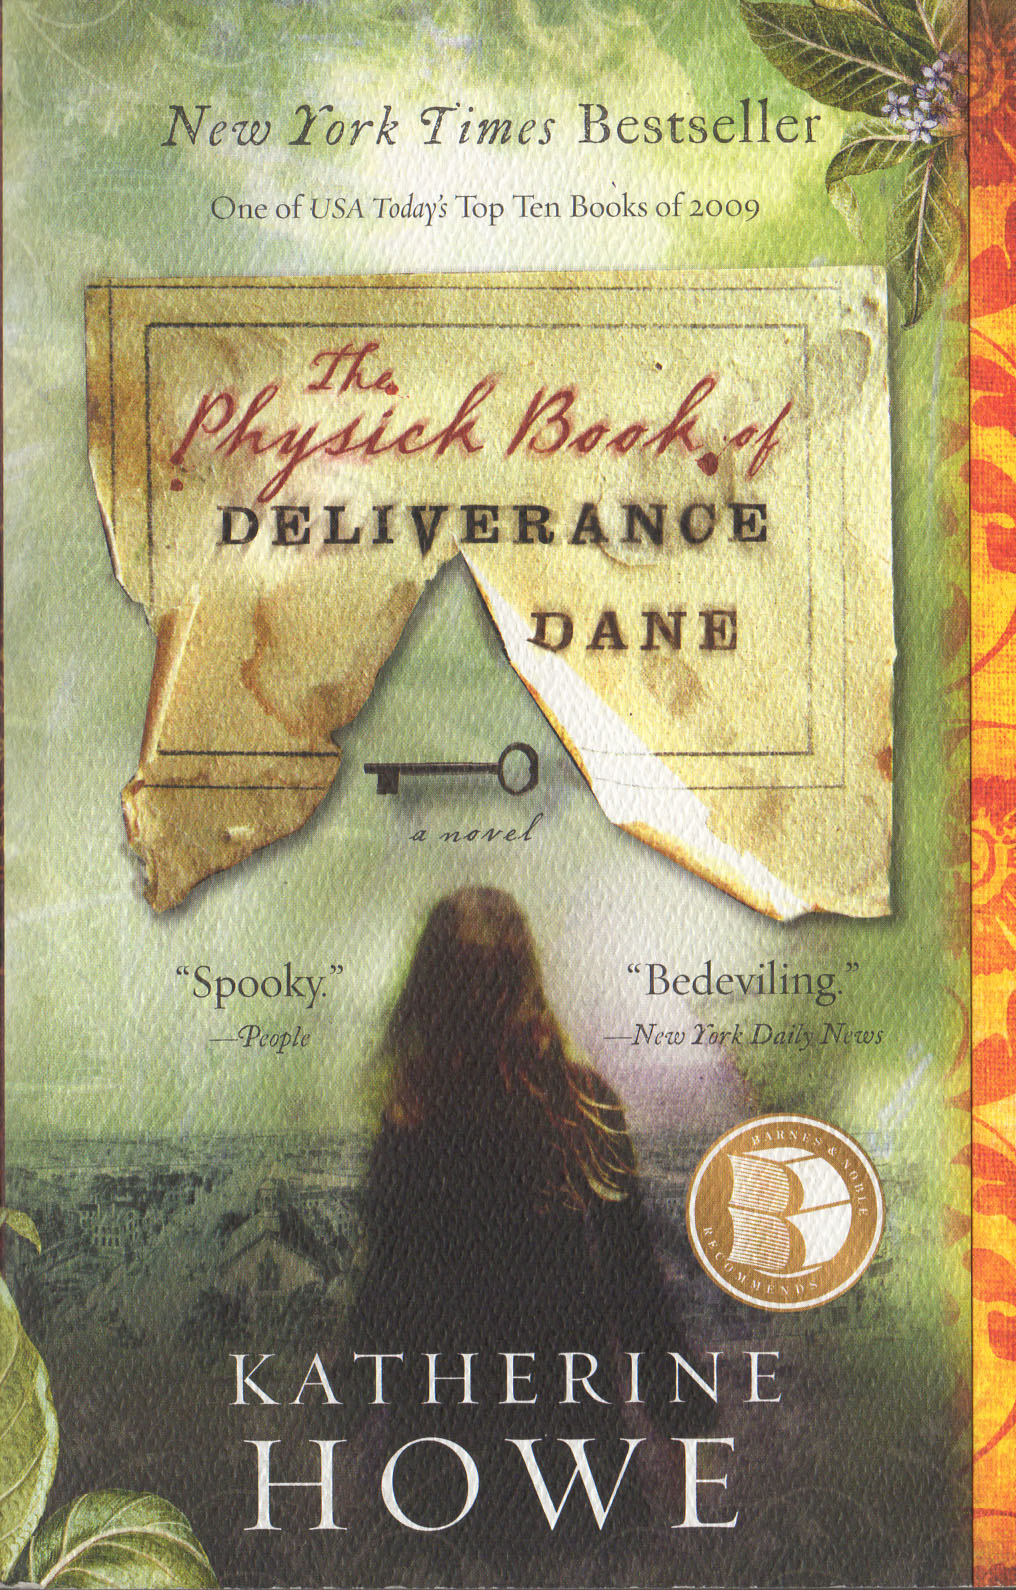 the physick book of deliverance dane review